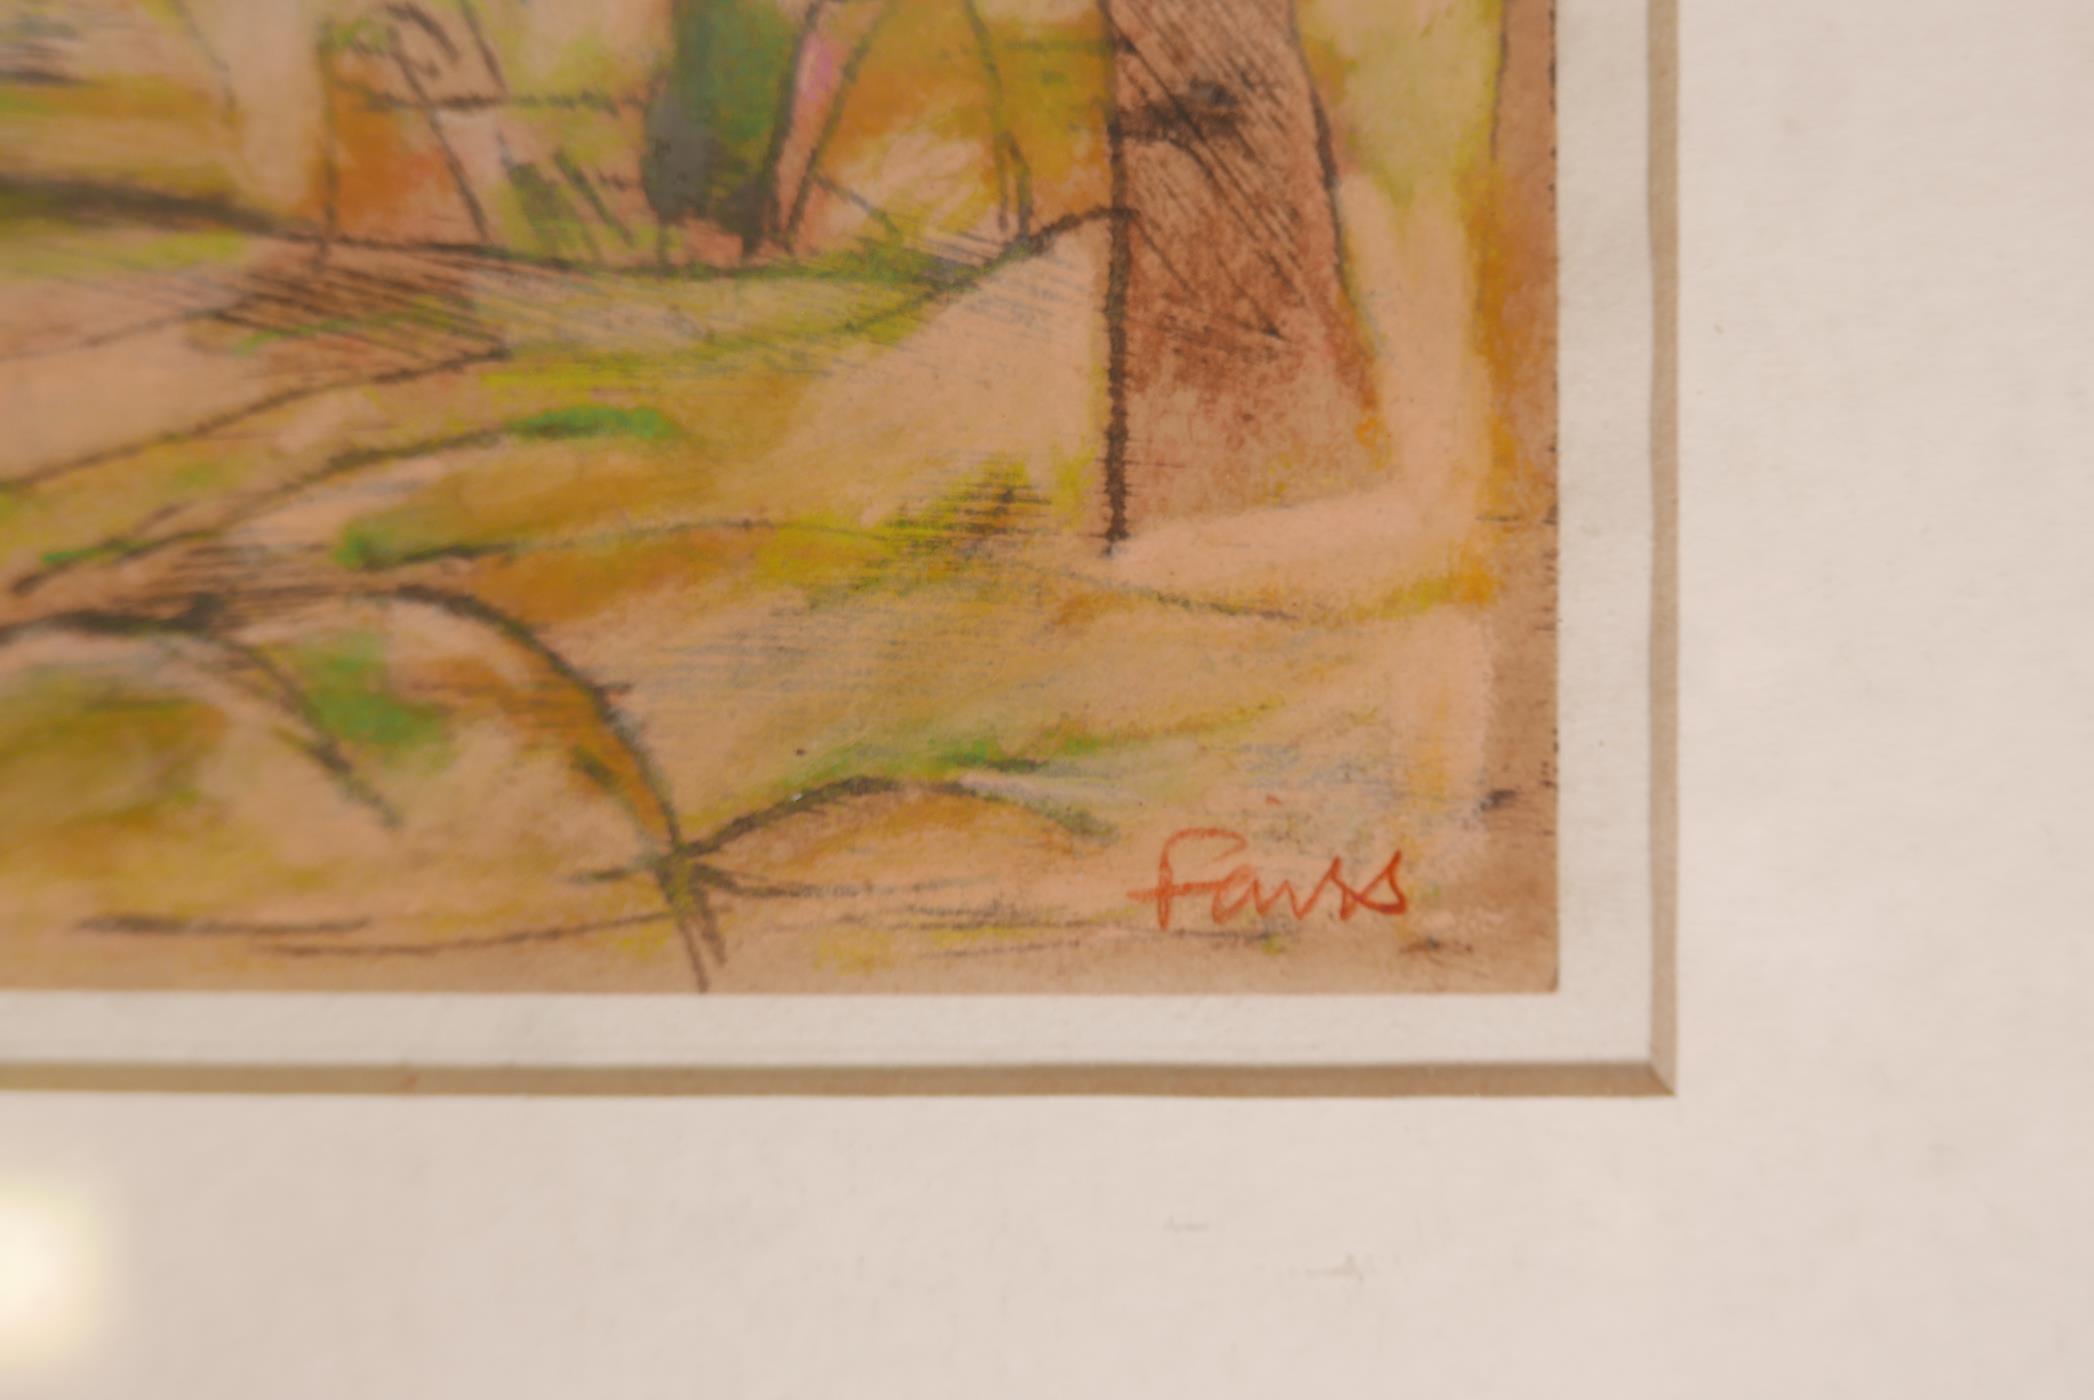 Continental landscape, mixed media on paper, signed Fairs?. 8" x 10" - Image 3 of 3